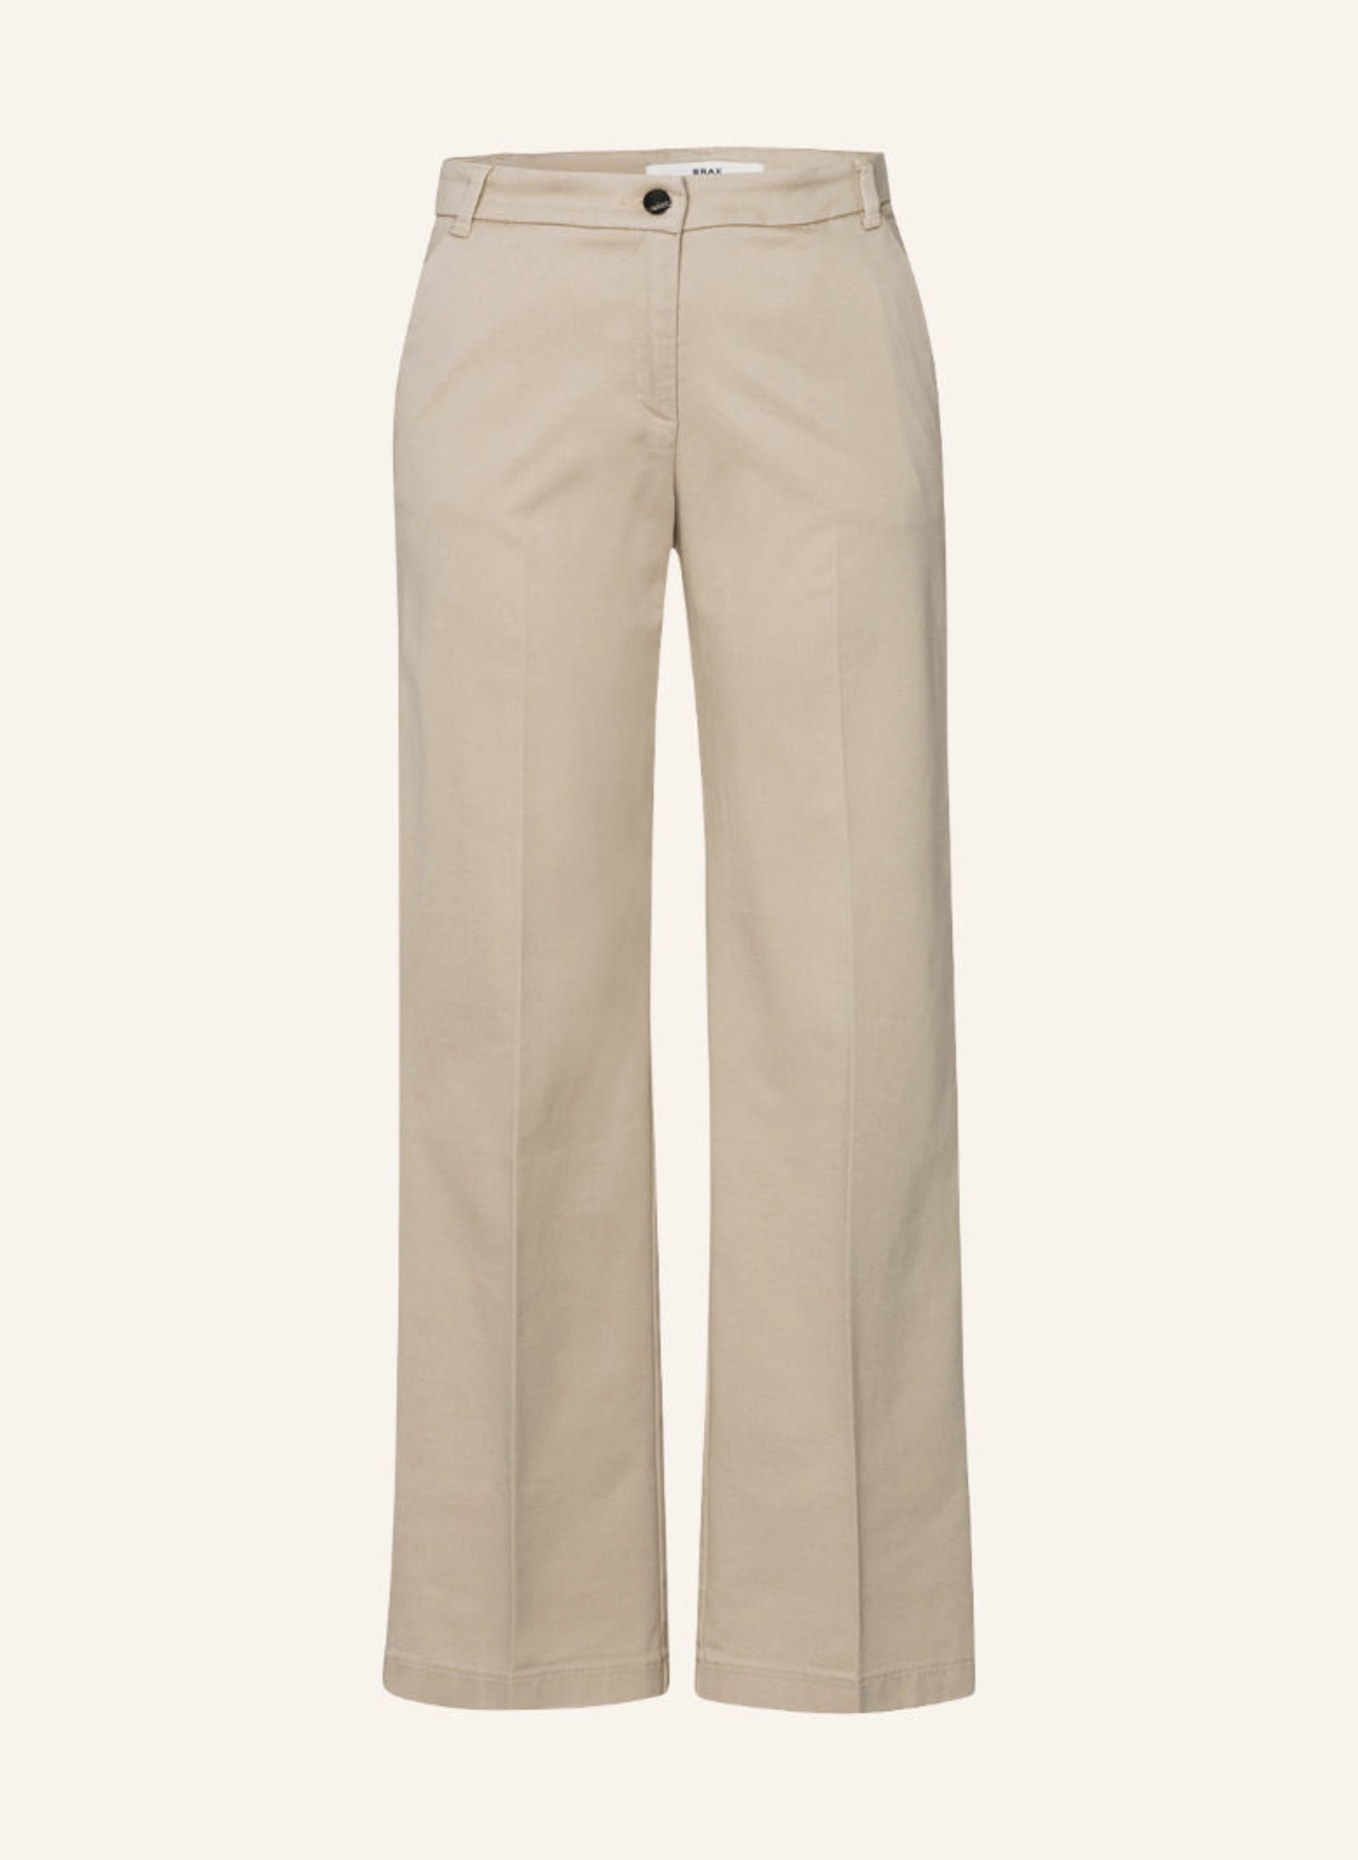 MAINE Palazzohose beige in BRAX STYLE